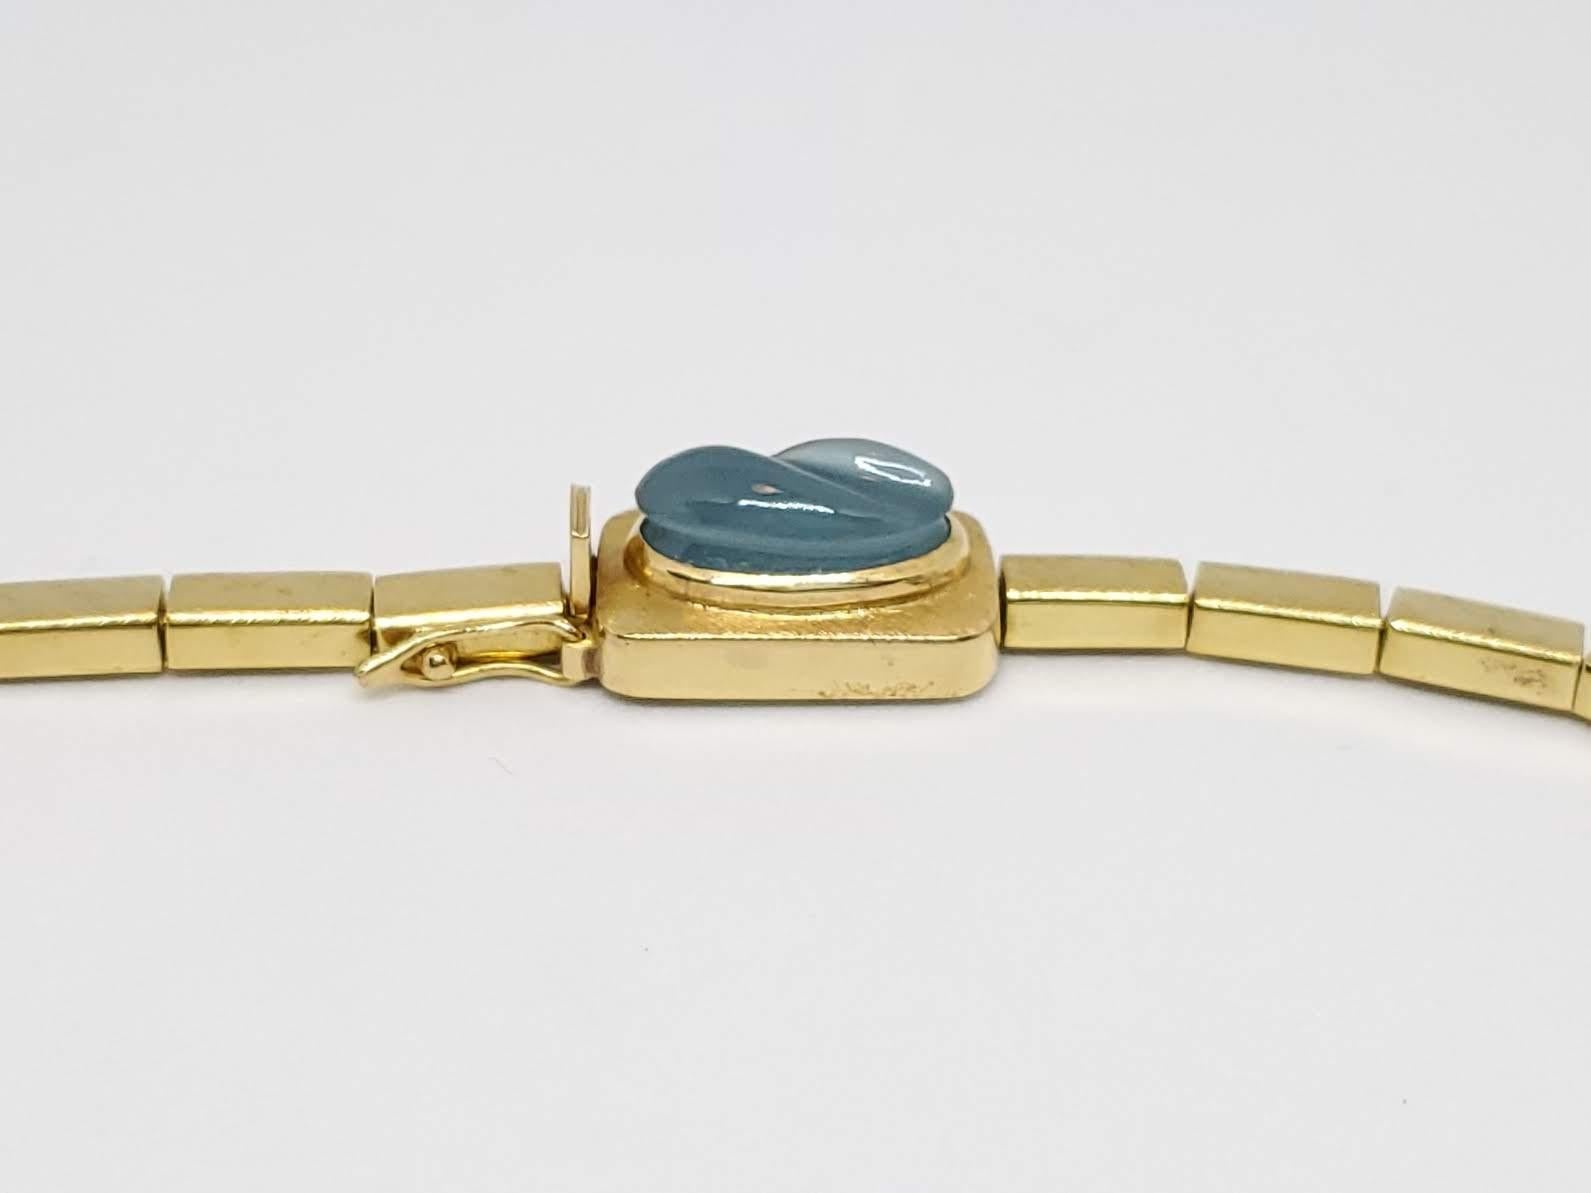 Thanks for taking a look at this Burle Marx Free Form Aquamarine Necklace. This type of simple elegance is what made Burle Marx famous. And by the way, as you can see the larger stone is detachable. It makes the piece more understated, but still